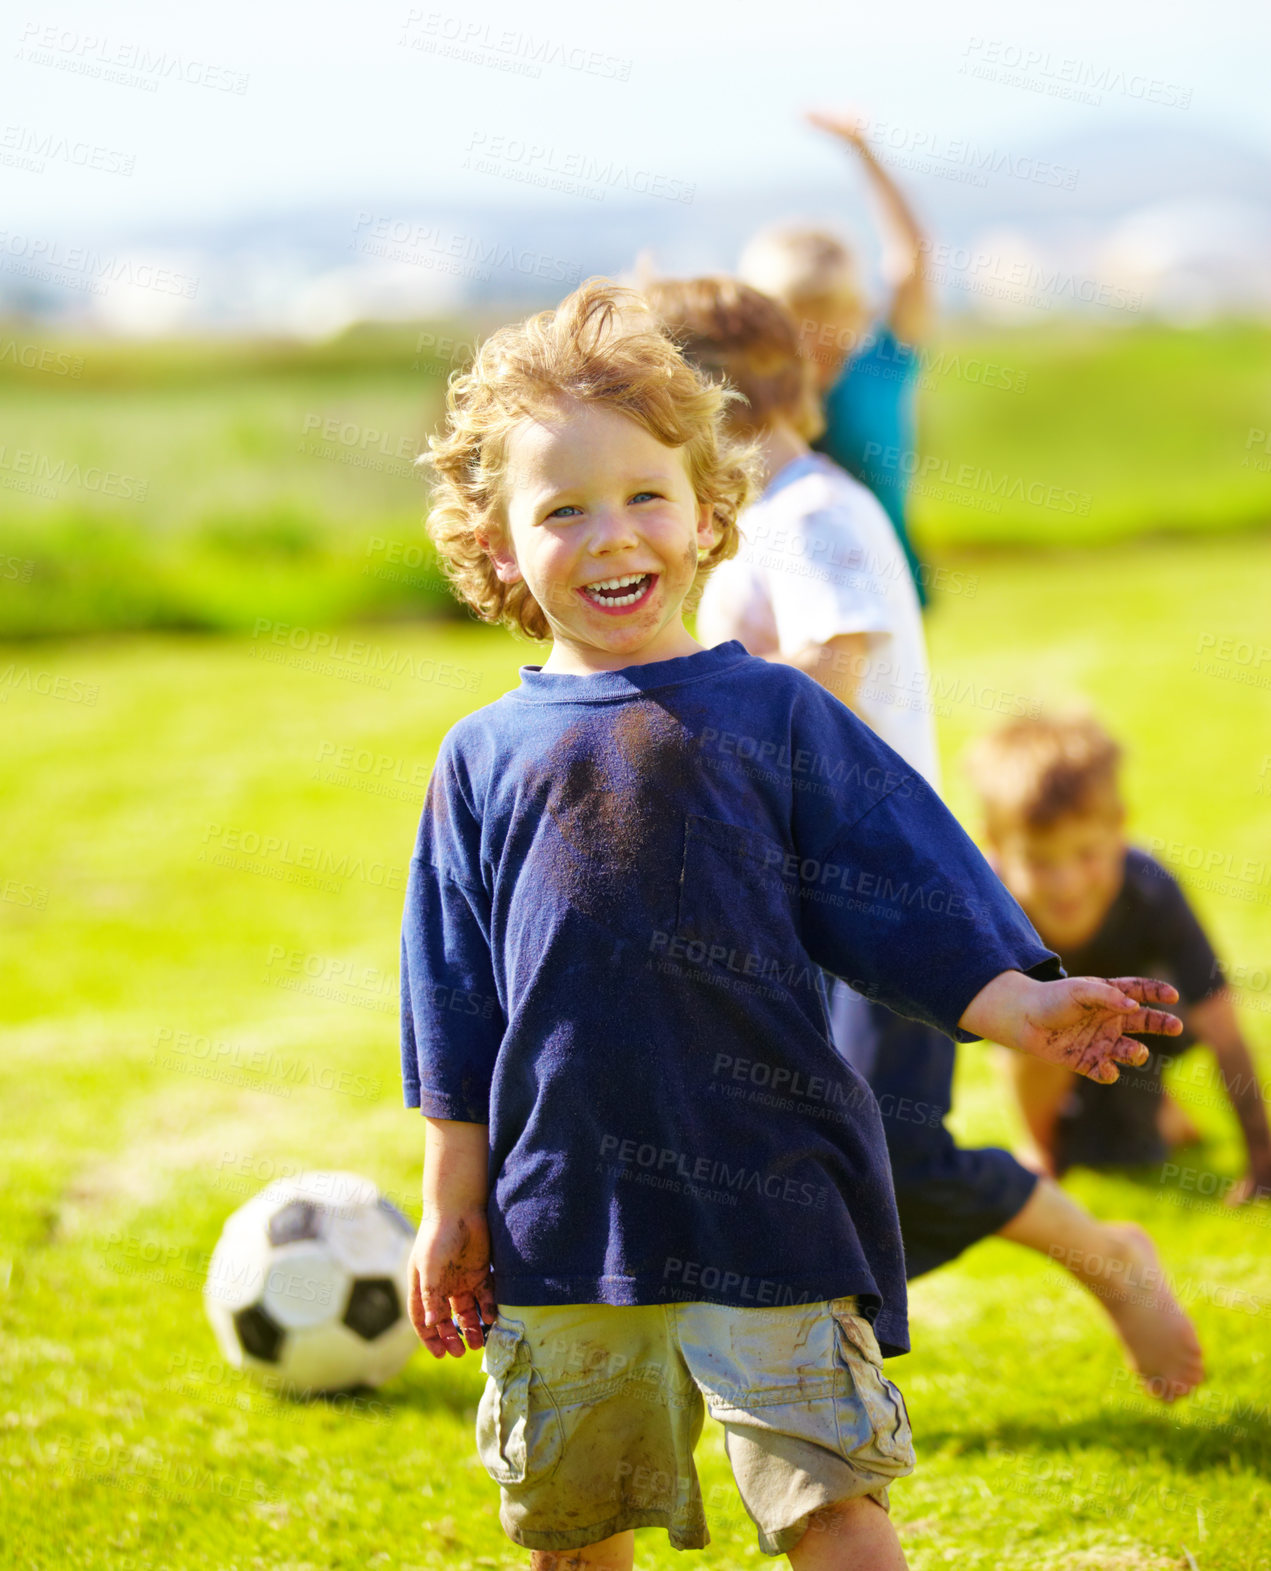 Buy stock photo Dirt, smile and portrait of child for soccer by grass, lawn and outdoor playing with happiness in nature. Boy, freedom or fun in football for activity, comic and excited in youth outside with friends